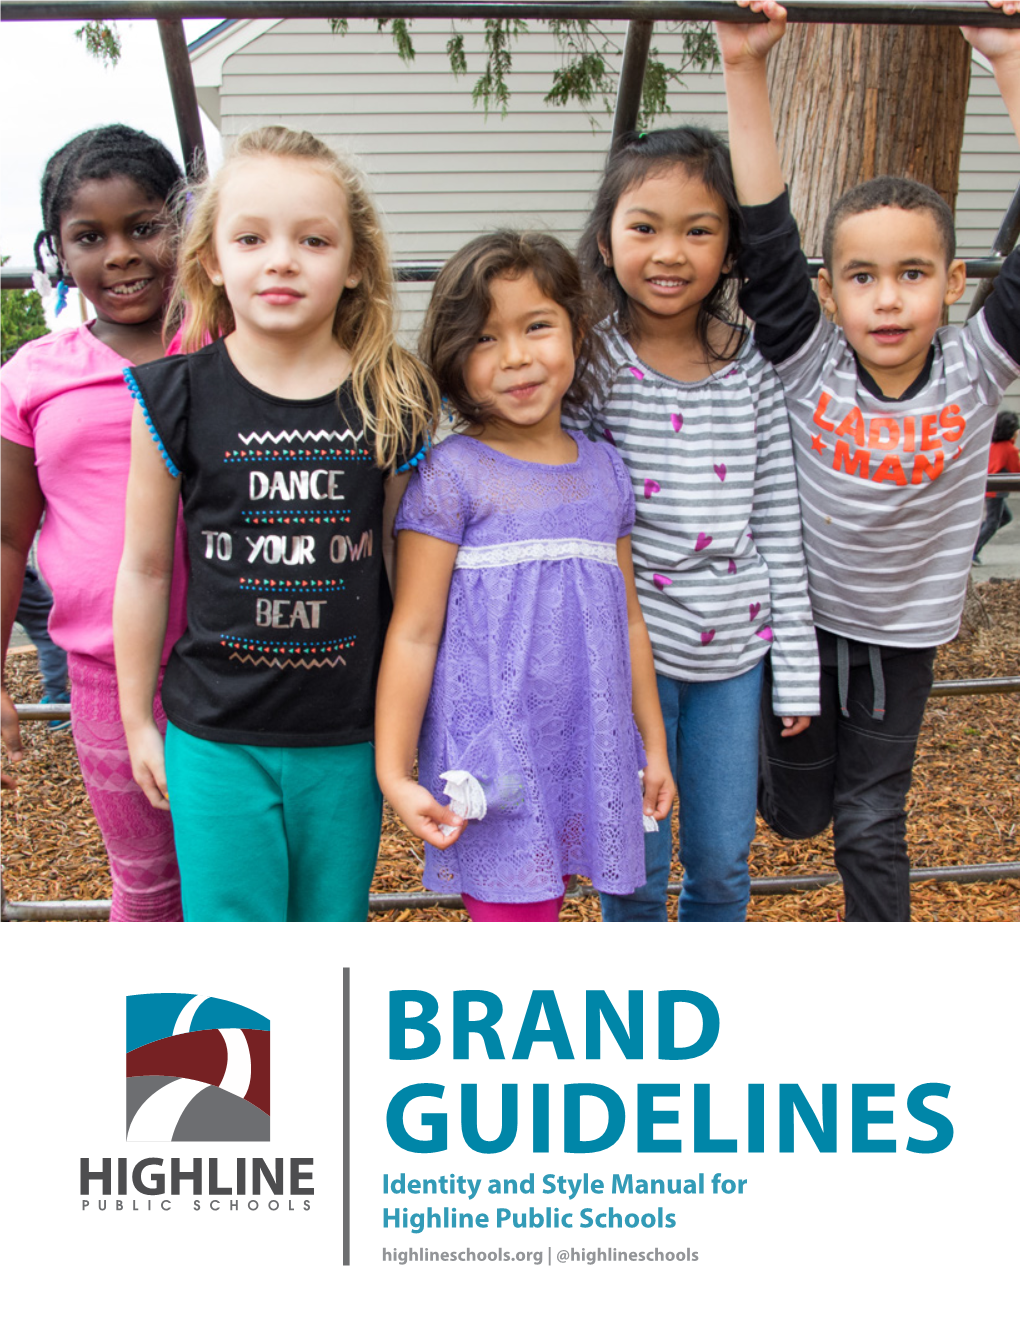 BRAND GUIDELINES Identity and Style Manual for Highline Public Schools Highlineschools.Org | @Highlineschools Contents